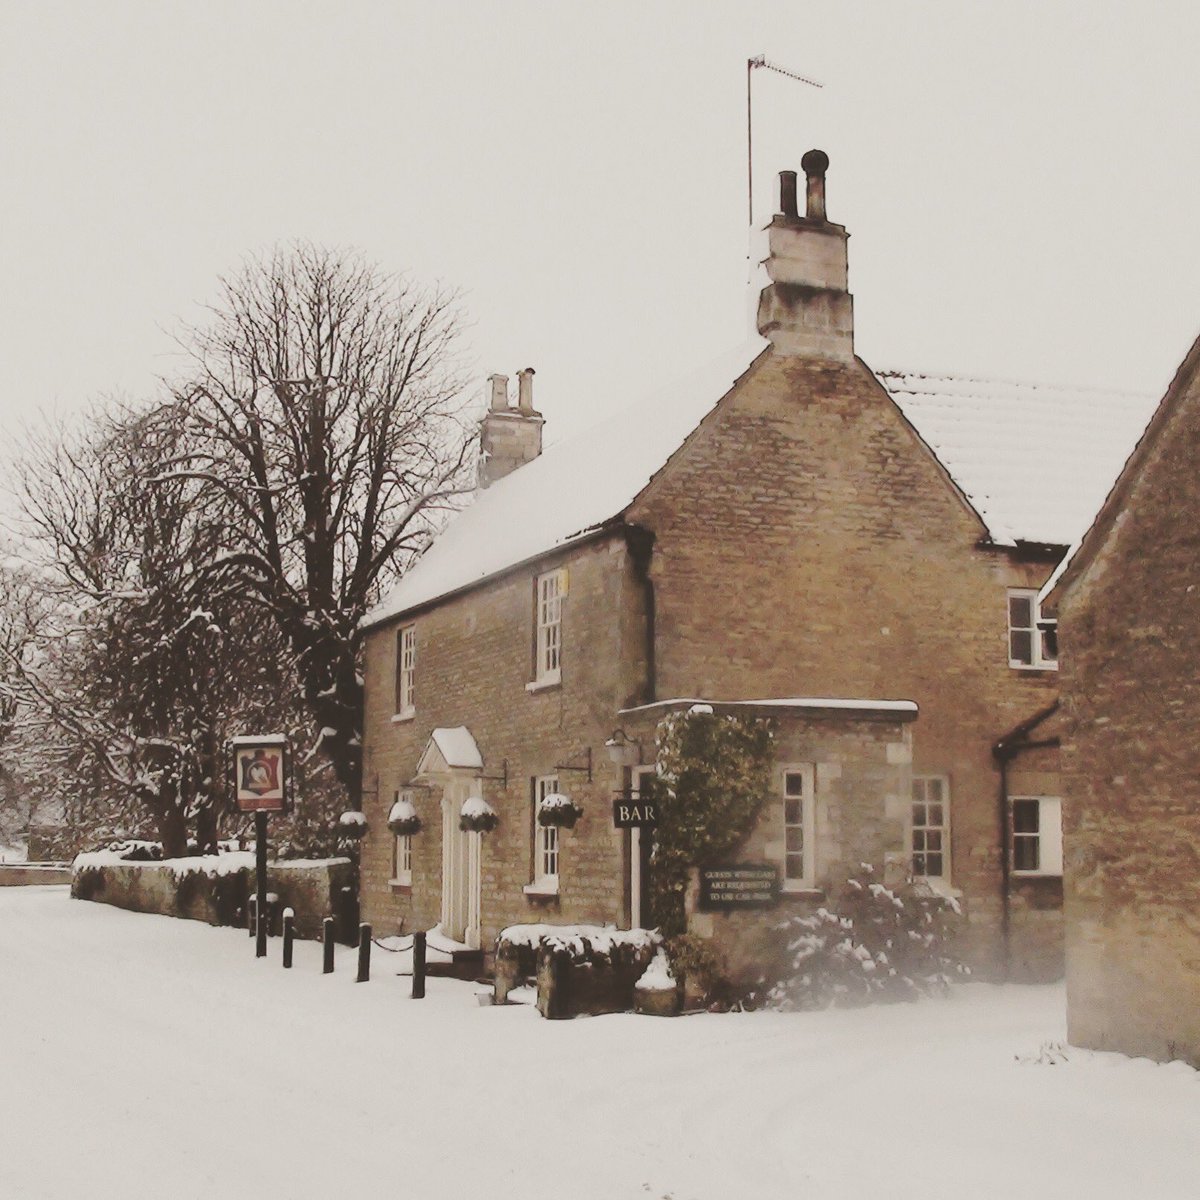 Is a White Christmas on the cards this year? Or just a Falcon one? #falconinnfotheringhay #WhiteChristmas